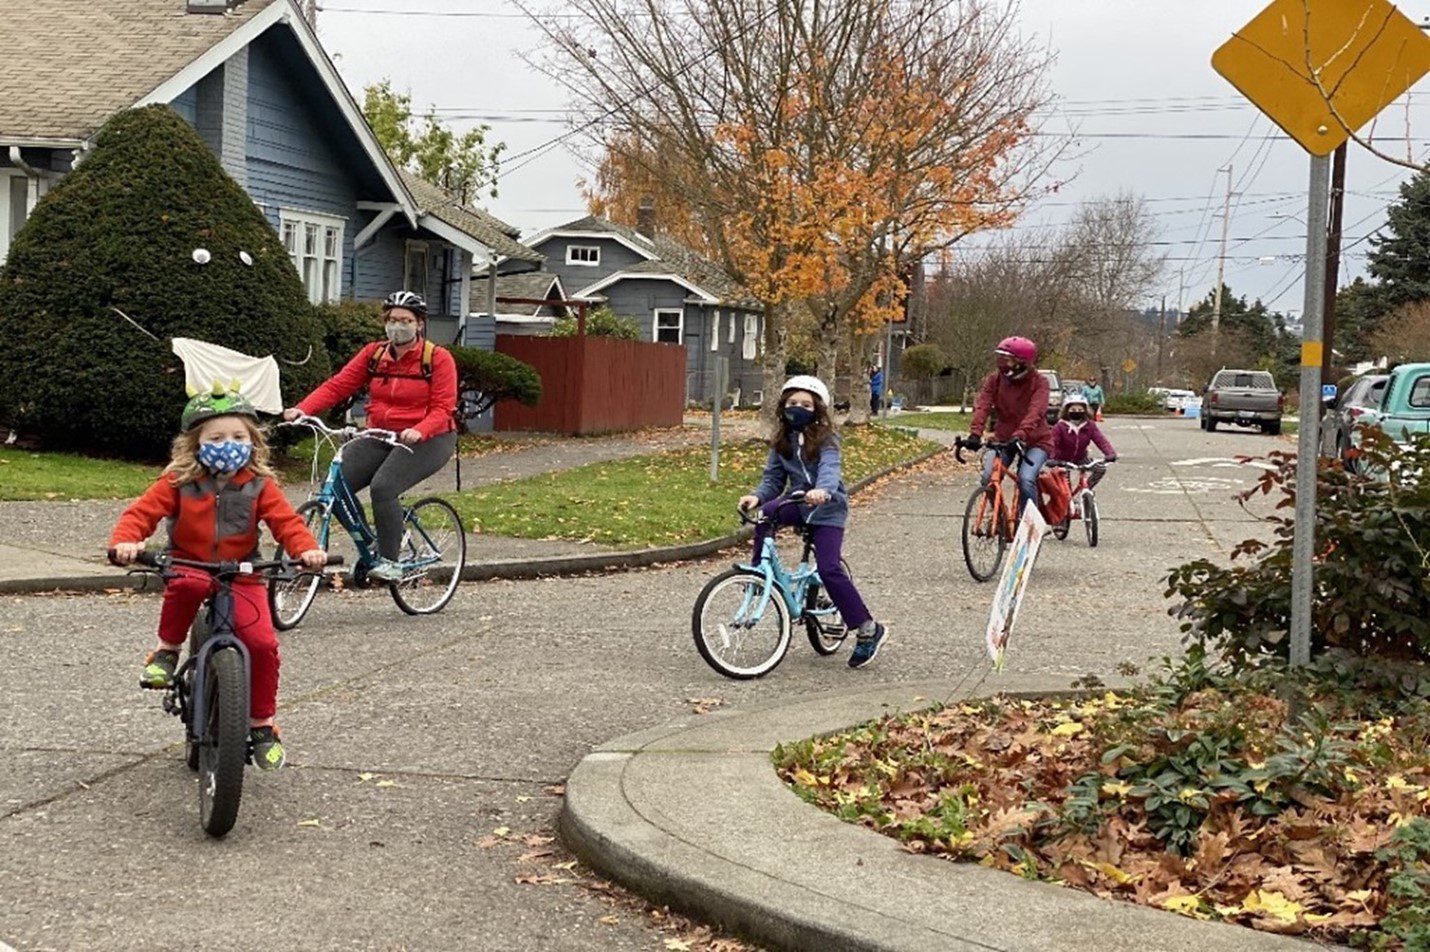 A number of school aged children ride their bicycles to school alongside two parents, on a local street in Seattle. There are a total of three children and two adults pictured, all on bicycles. A pedestrian is visible in the background. Fallen leaves and several parked cars, and nearby houses, can be seen in the foreground and background of the image.